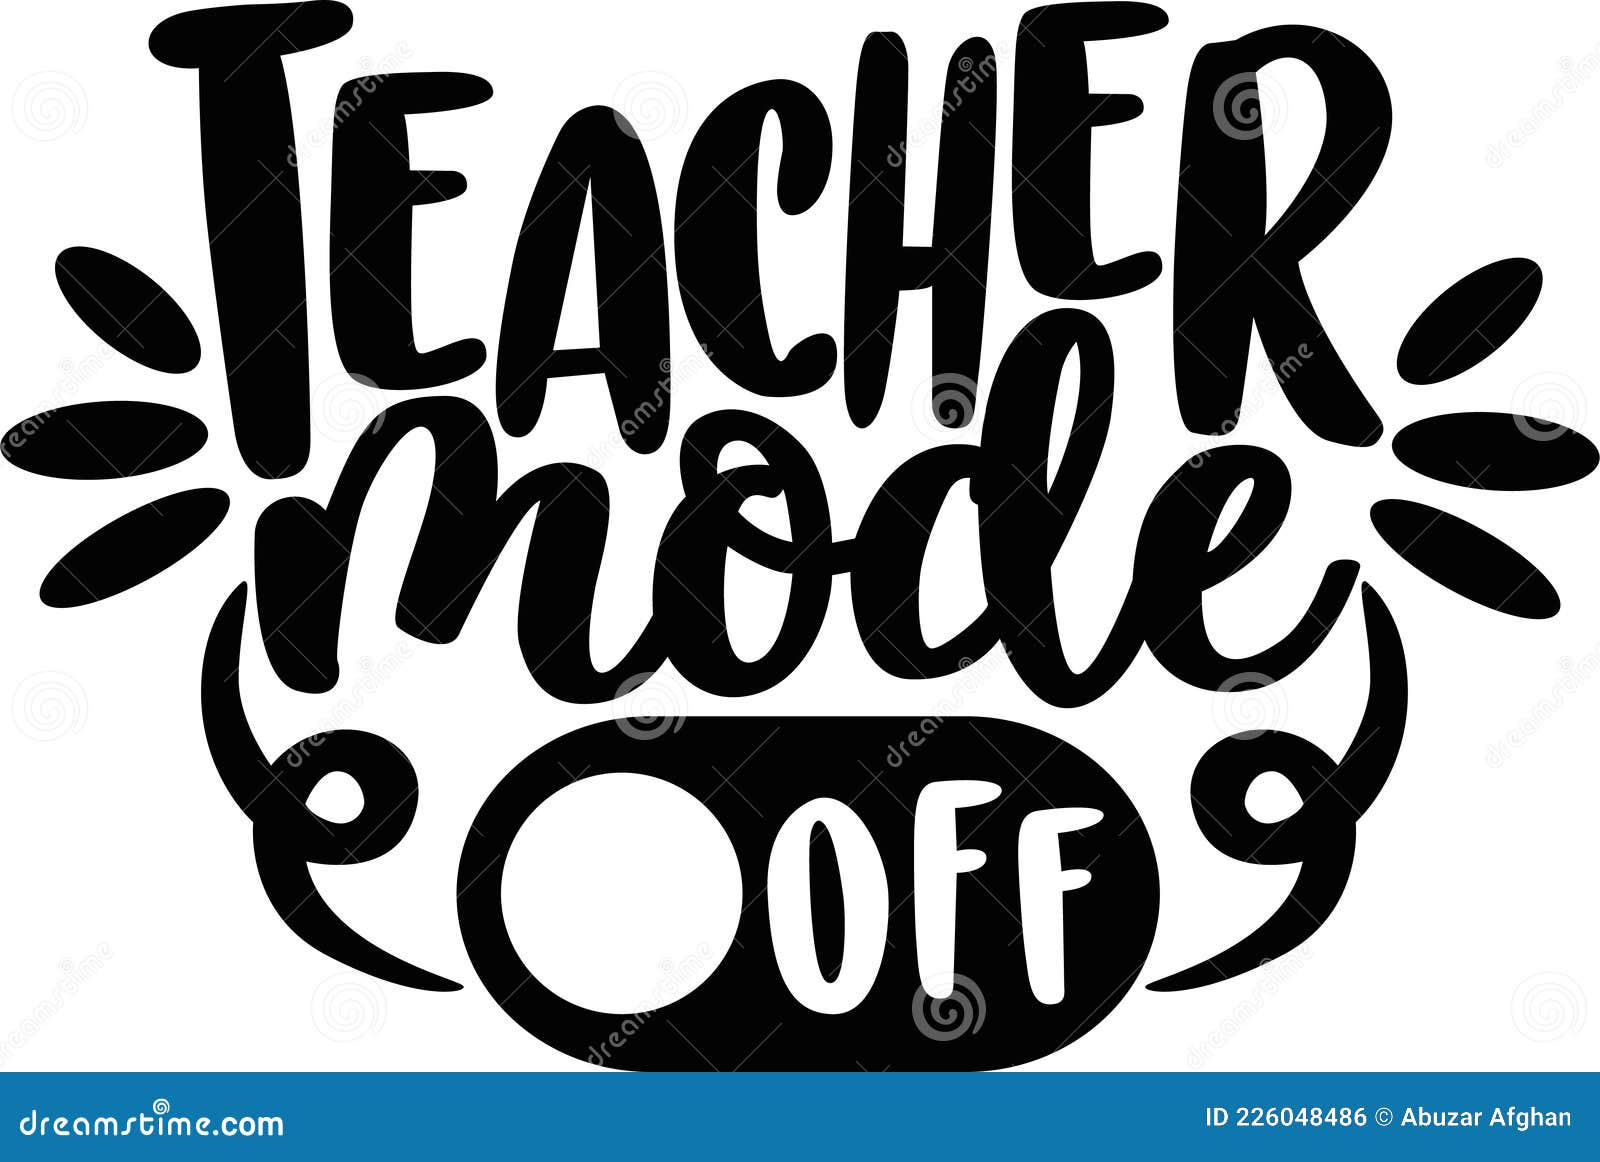 Teacher Mode Off T Shirt Design Svg Vector Cutfile For Cricut And Silhouette Stock Photo Illustration Of Shirt Banner 226048486